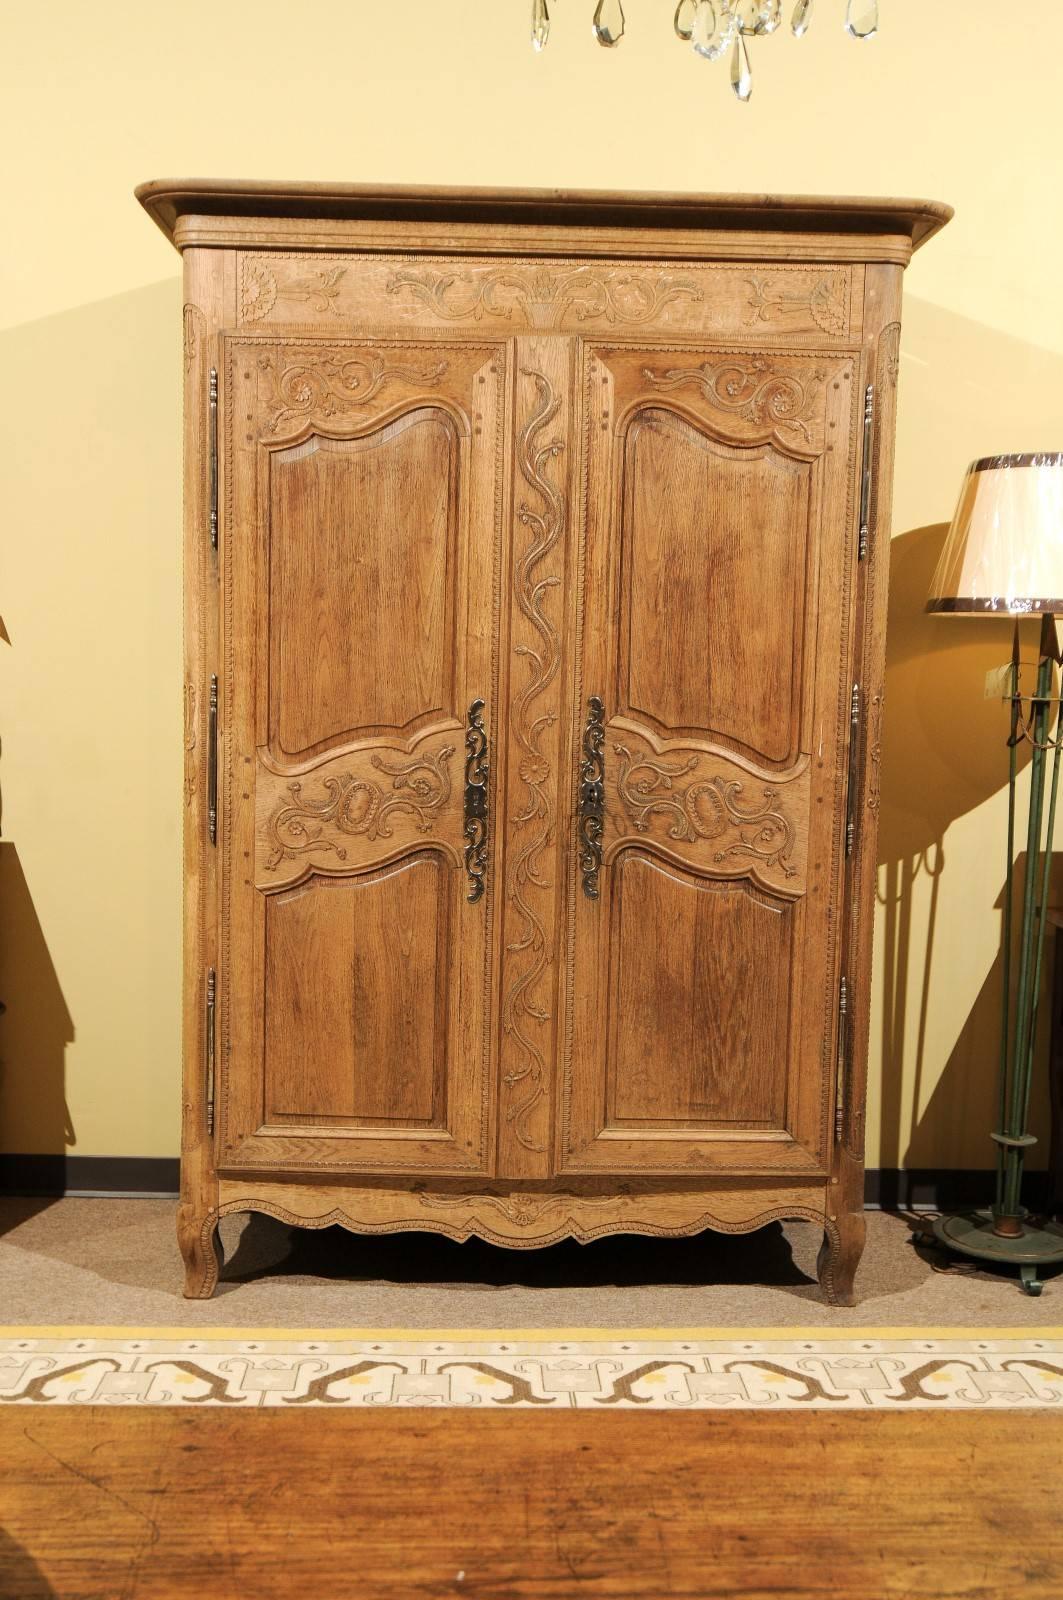 19th century carved oak armoire from Normandy

We know this armoire is from Normandy because the intricate, very detailed carving is typical of pieces from that area. In addition, oak is a native wood to Normandy and Brittany and often the first